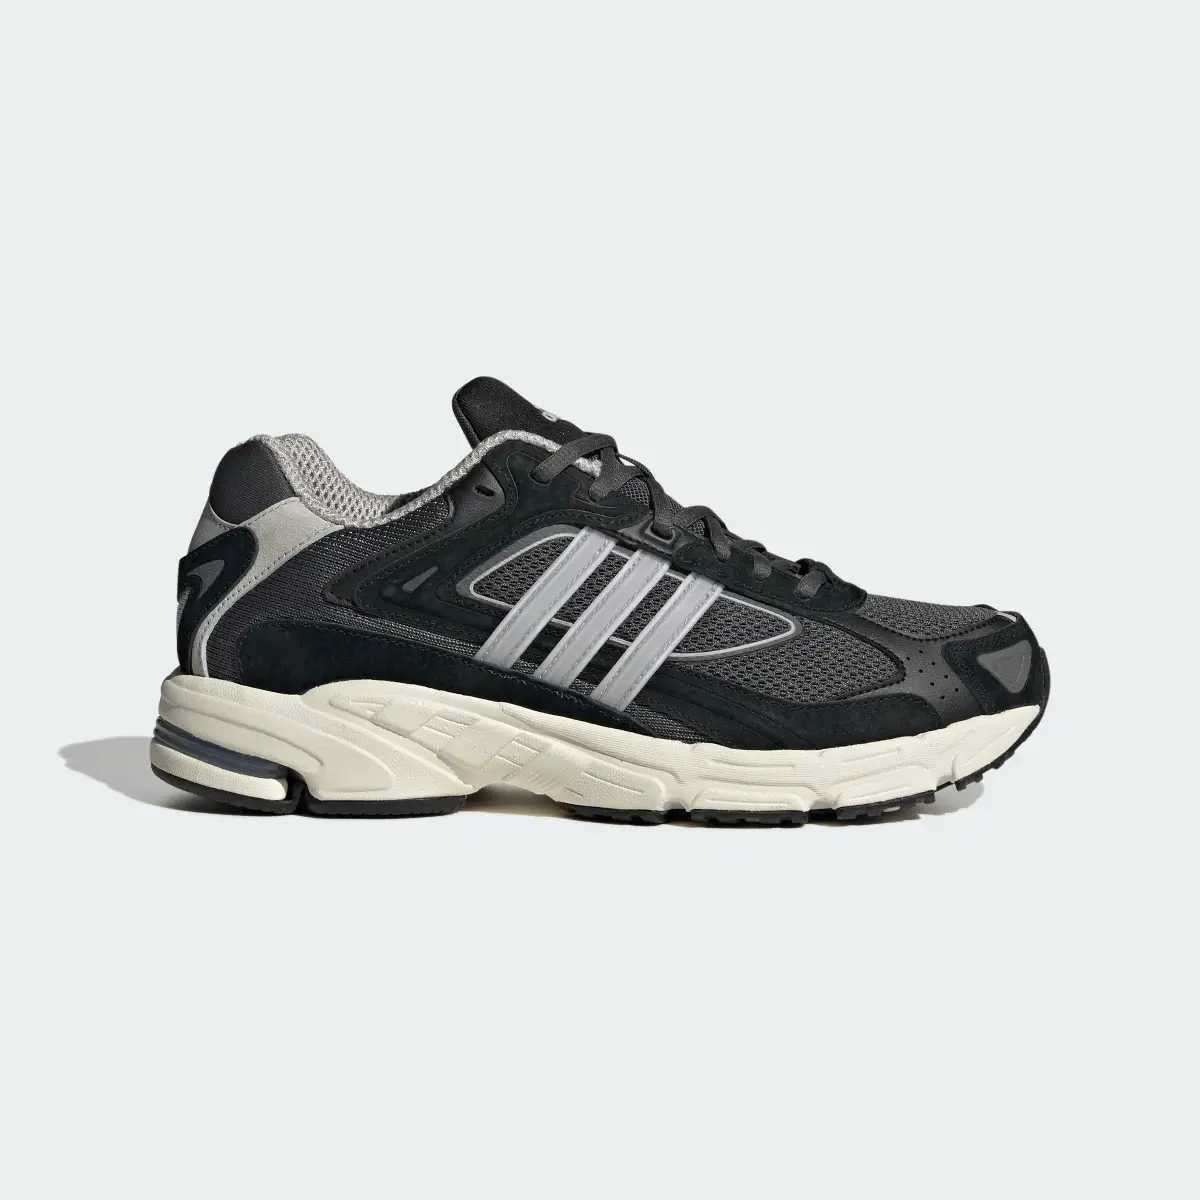 Adidas Chaussure Response CL. 2